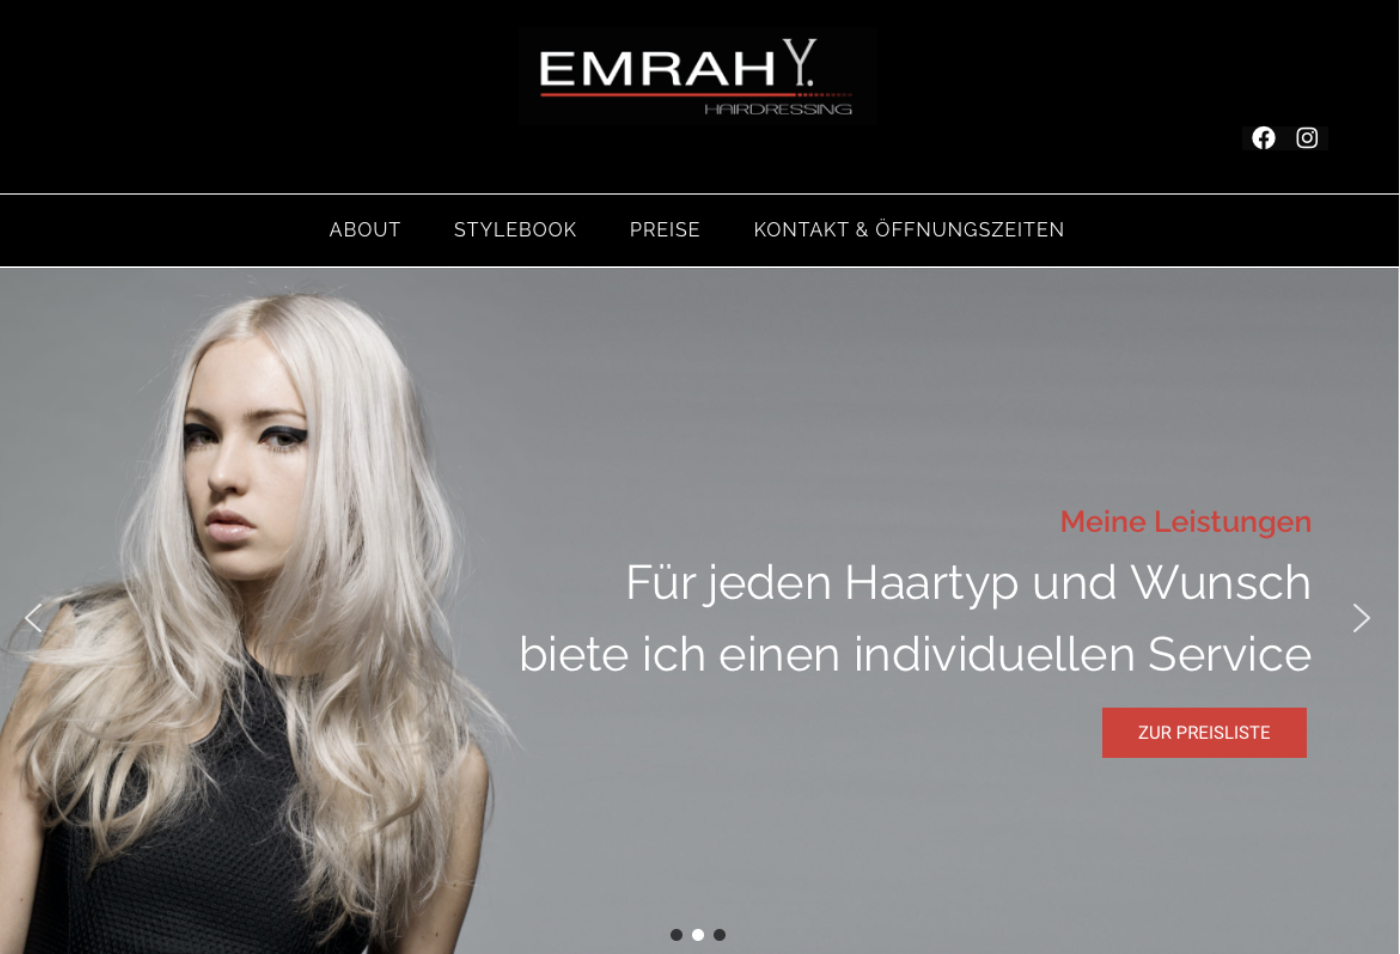 You are currently viewing Emrah Hairdressing Website in neuem Design